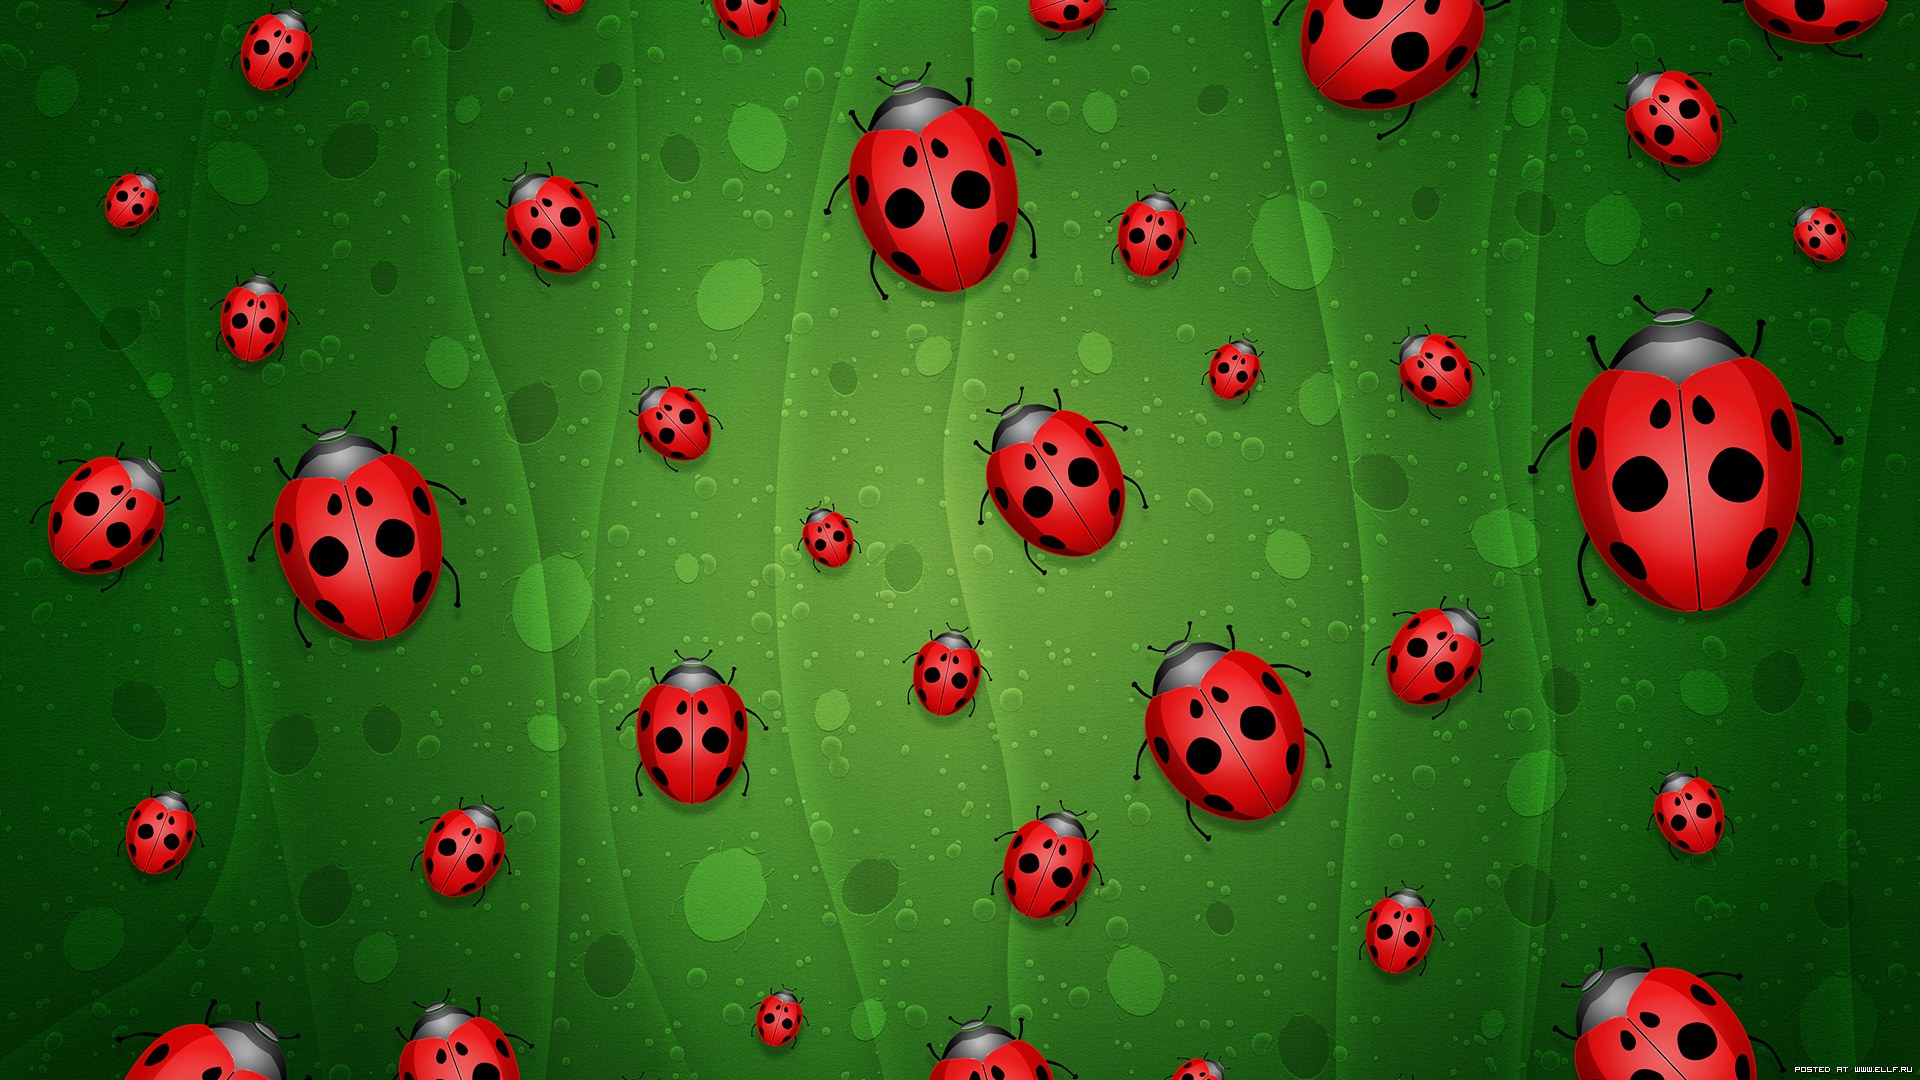 Wallpapers ladybugs green background on the desktop